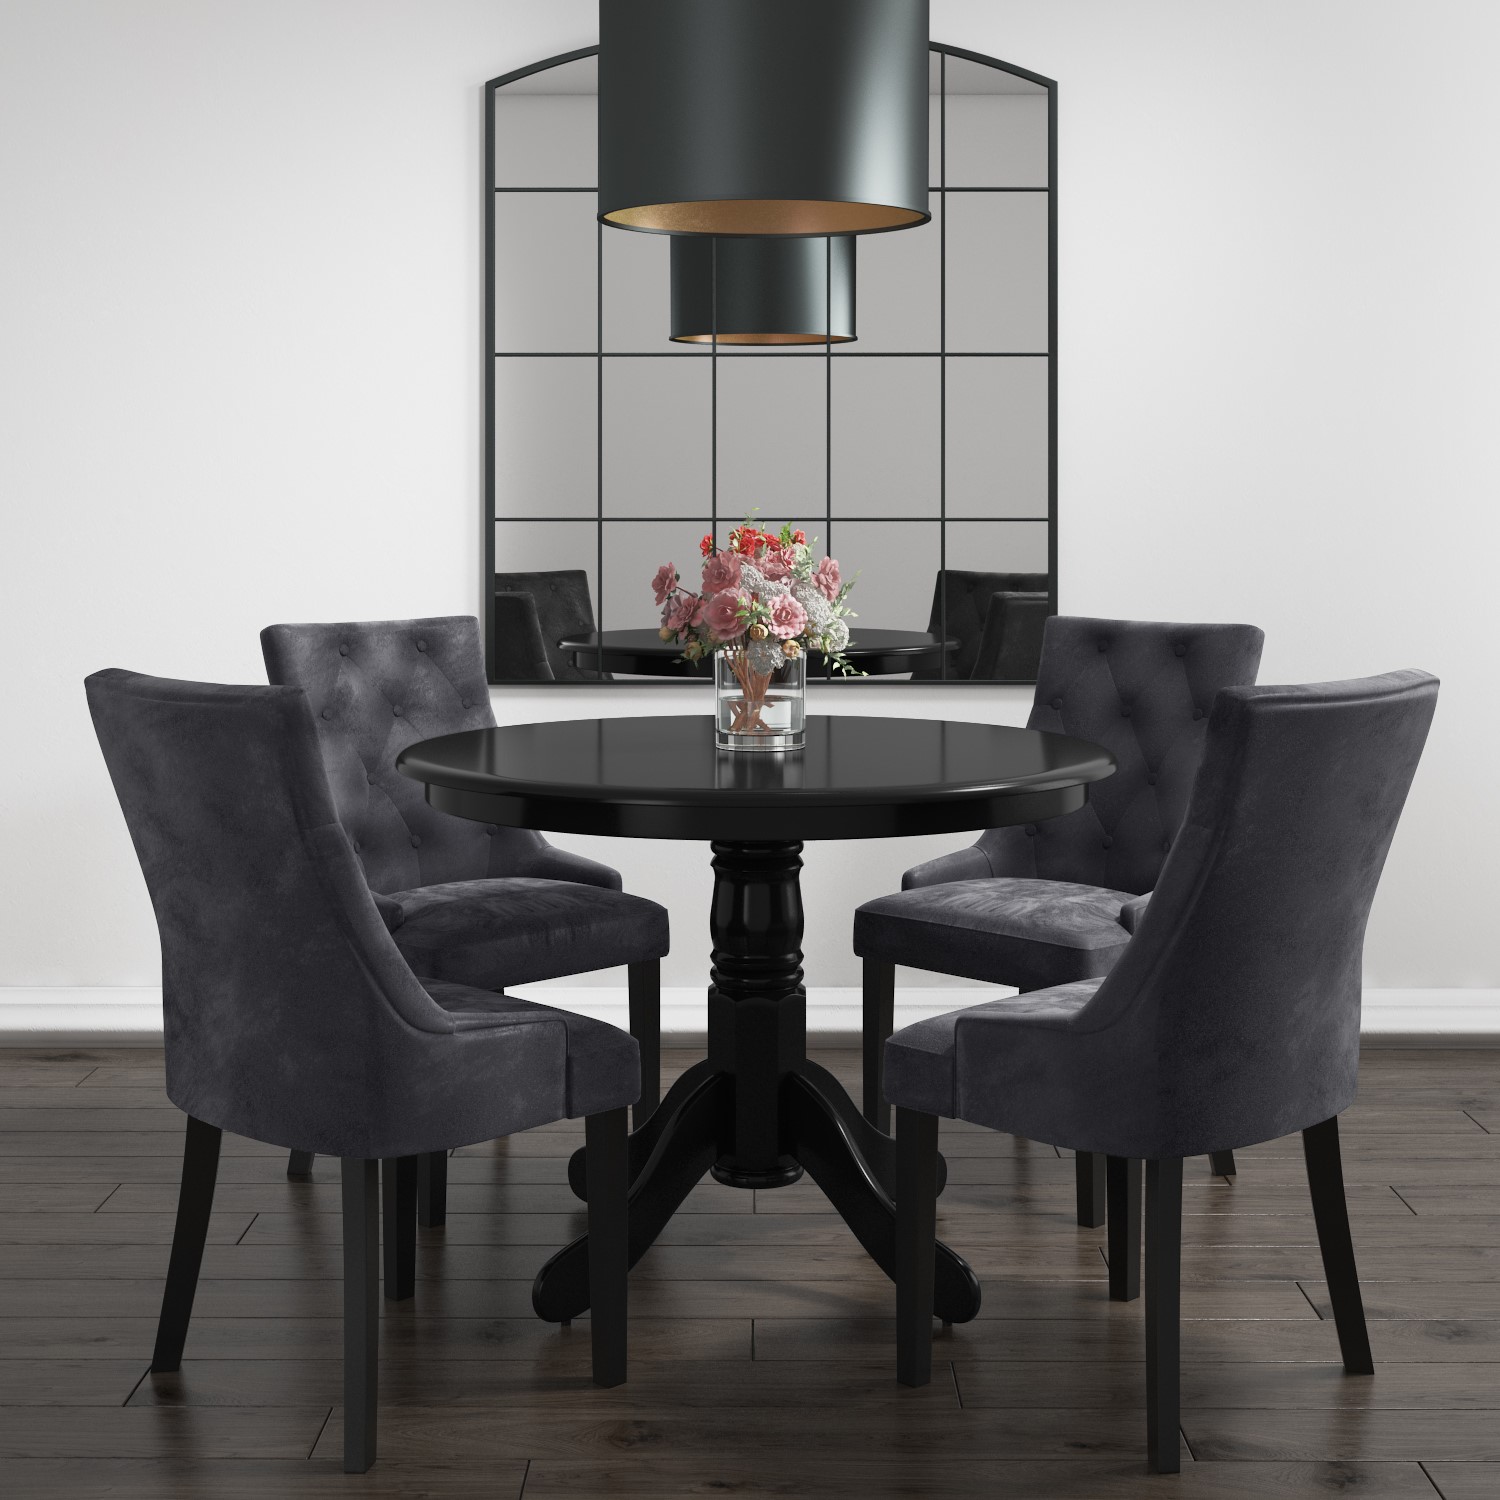 Black Pedestal Table And Chairs - Best Decorations